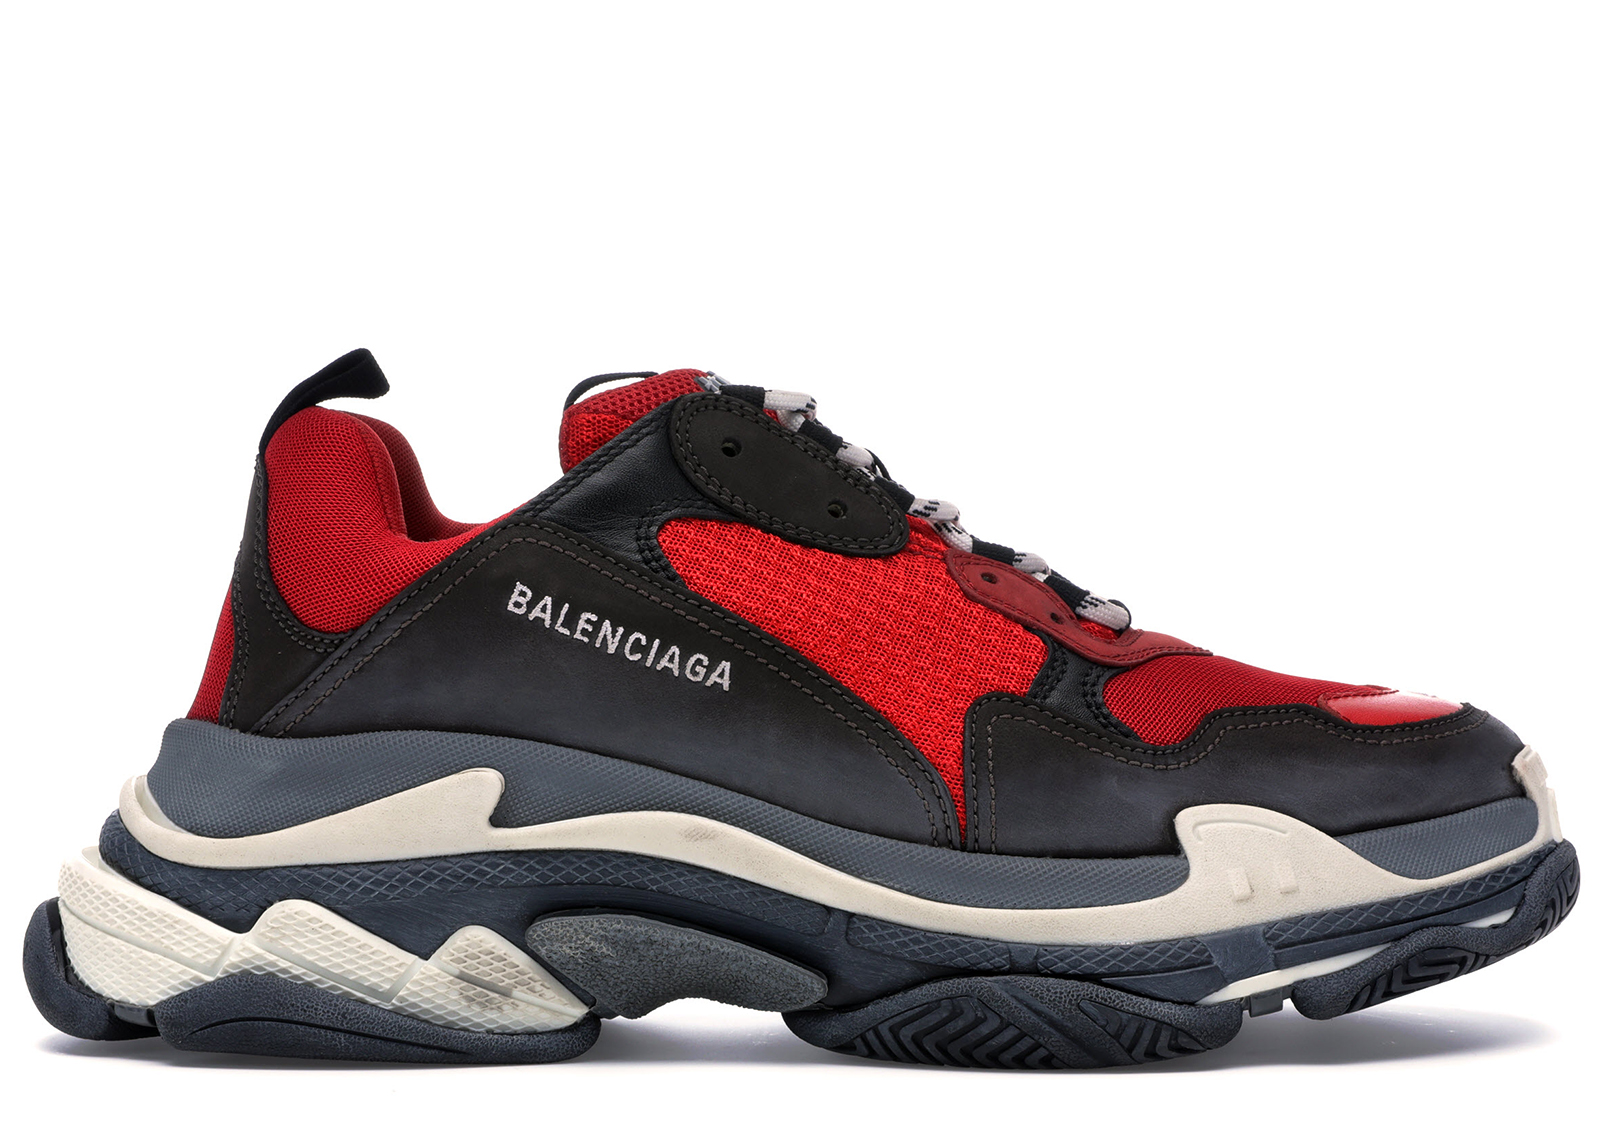 Ranking Balenciagas Best and Worst Sneakers